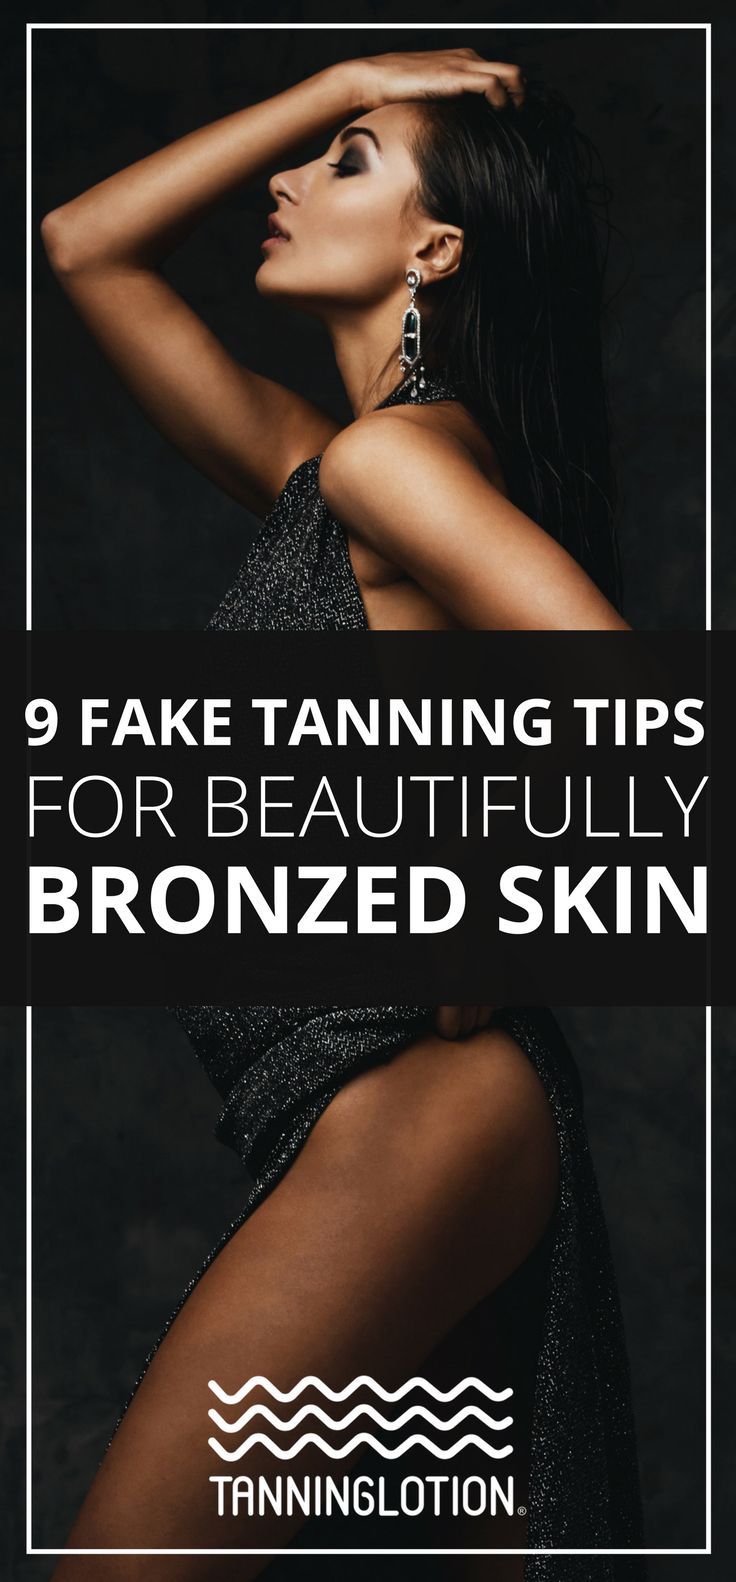 9 Fake Tanning Tips For A Beautiful Bronze Skin